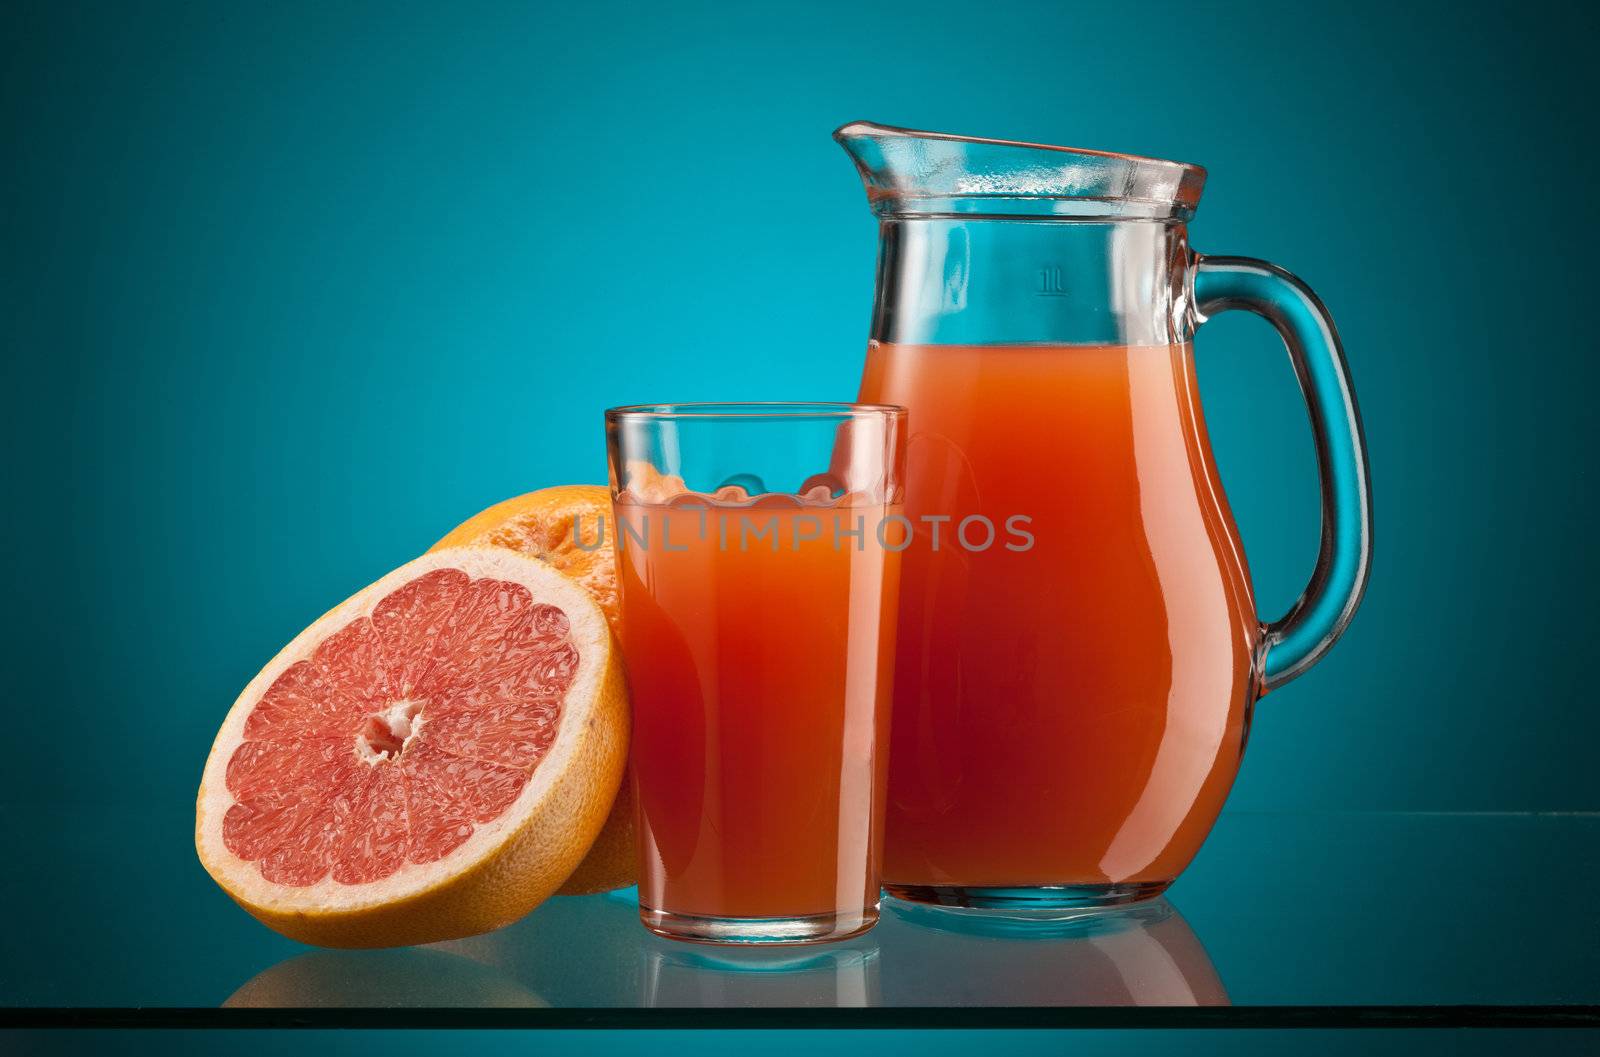 fresh grapefruit juice in the glass and jar over blue